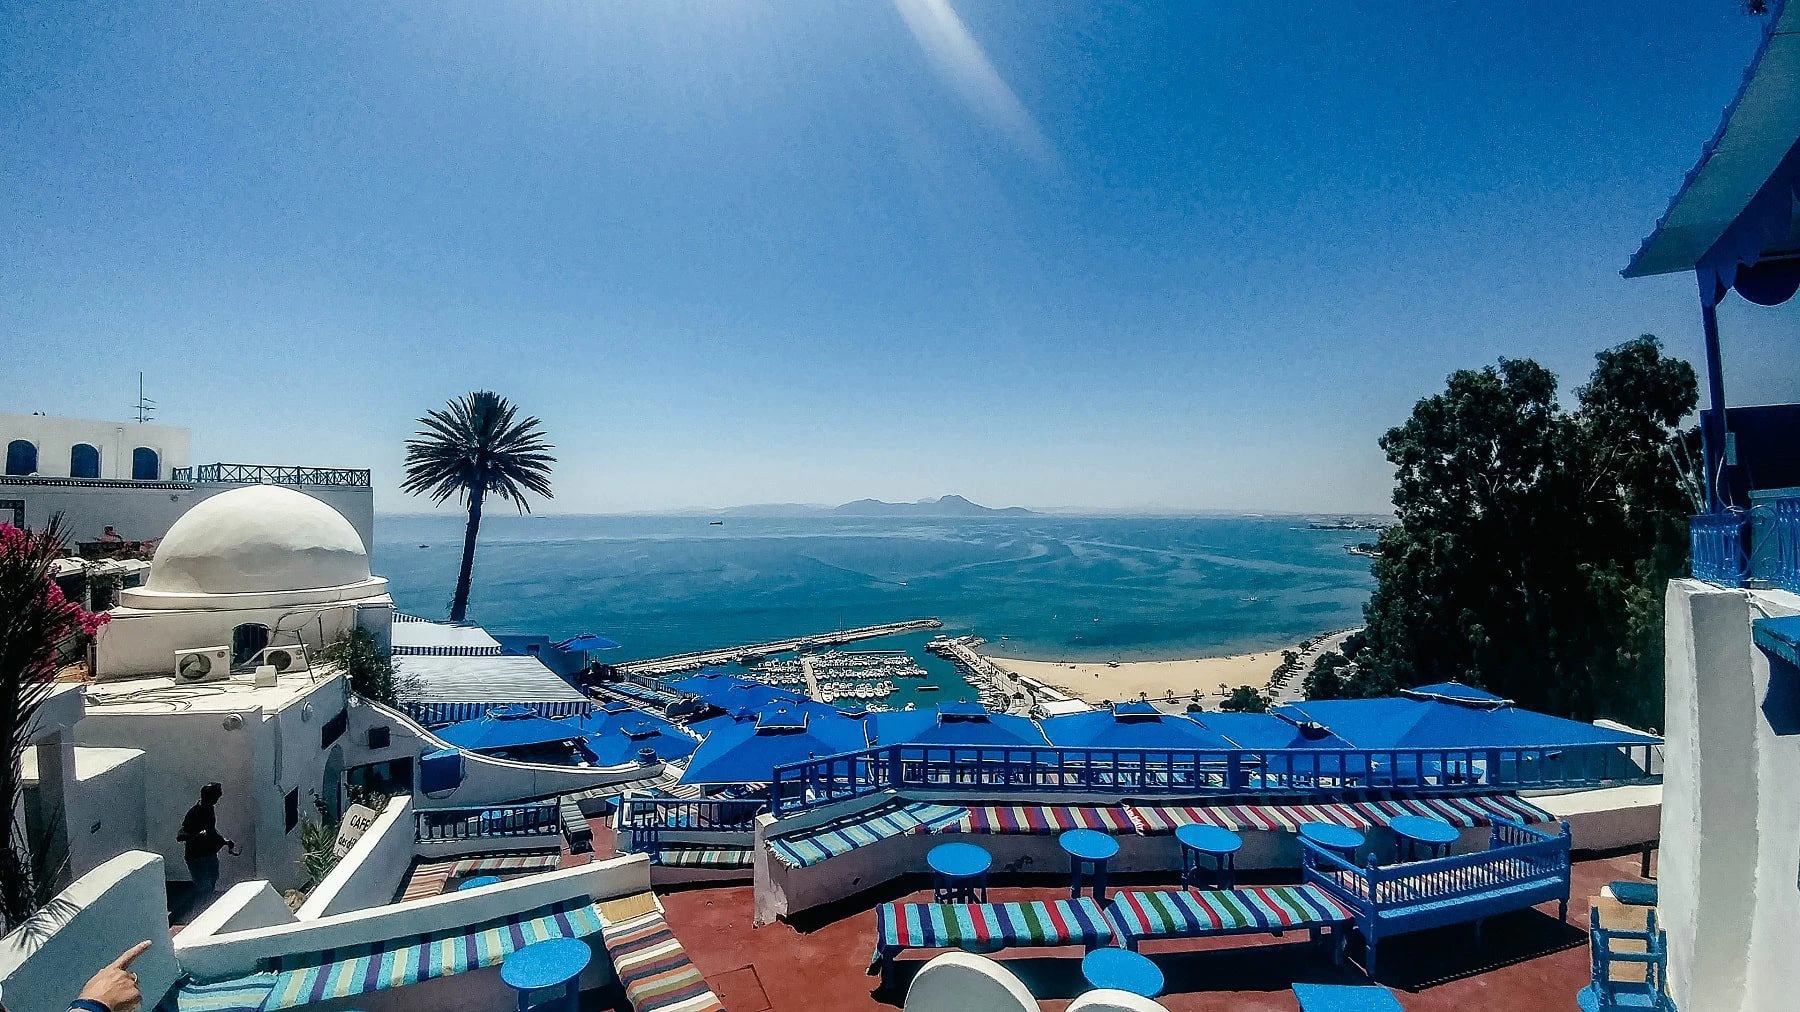 An amazing view from the famous Café des Délices in Sidi Bou Said